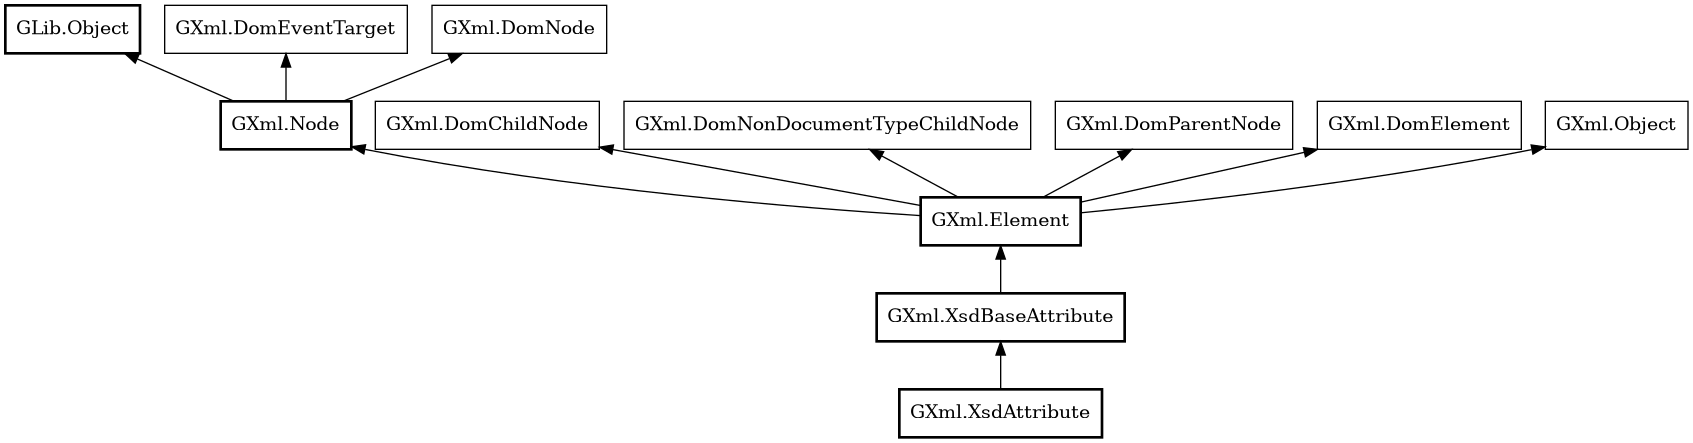 Object hierarchy for XsdAttribute